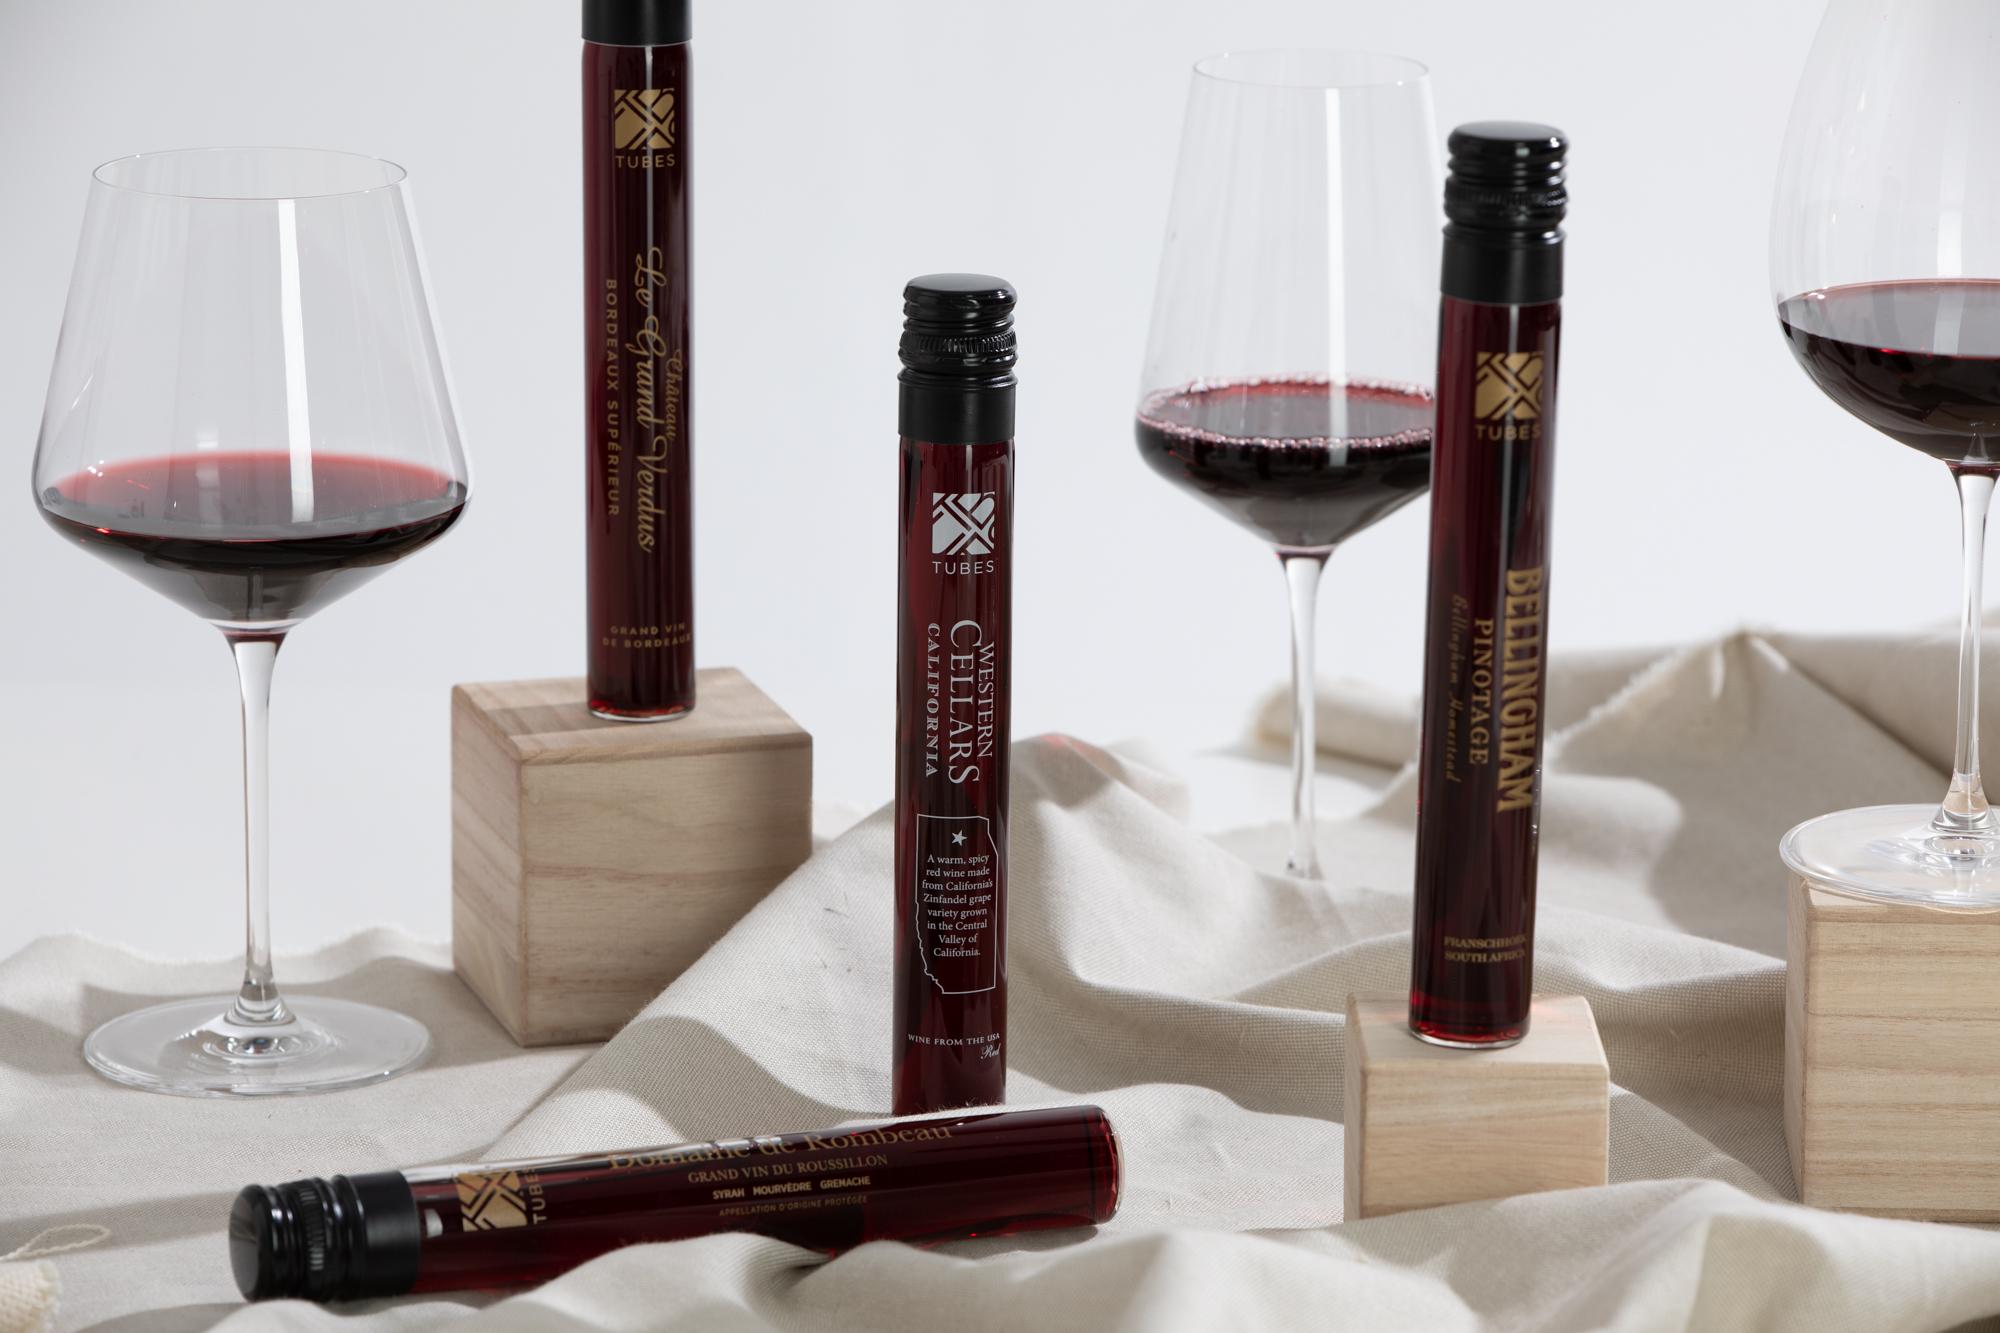 TUBES launches “TUBES Revined”, a revolutionary wine and spirits sampling solution